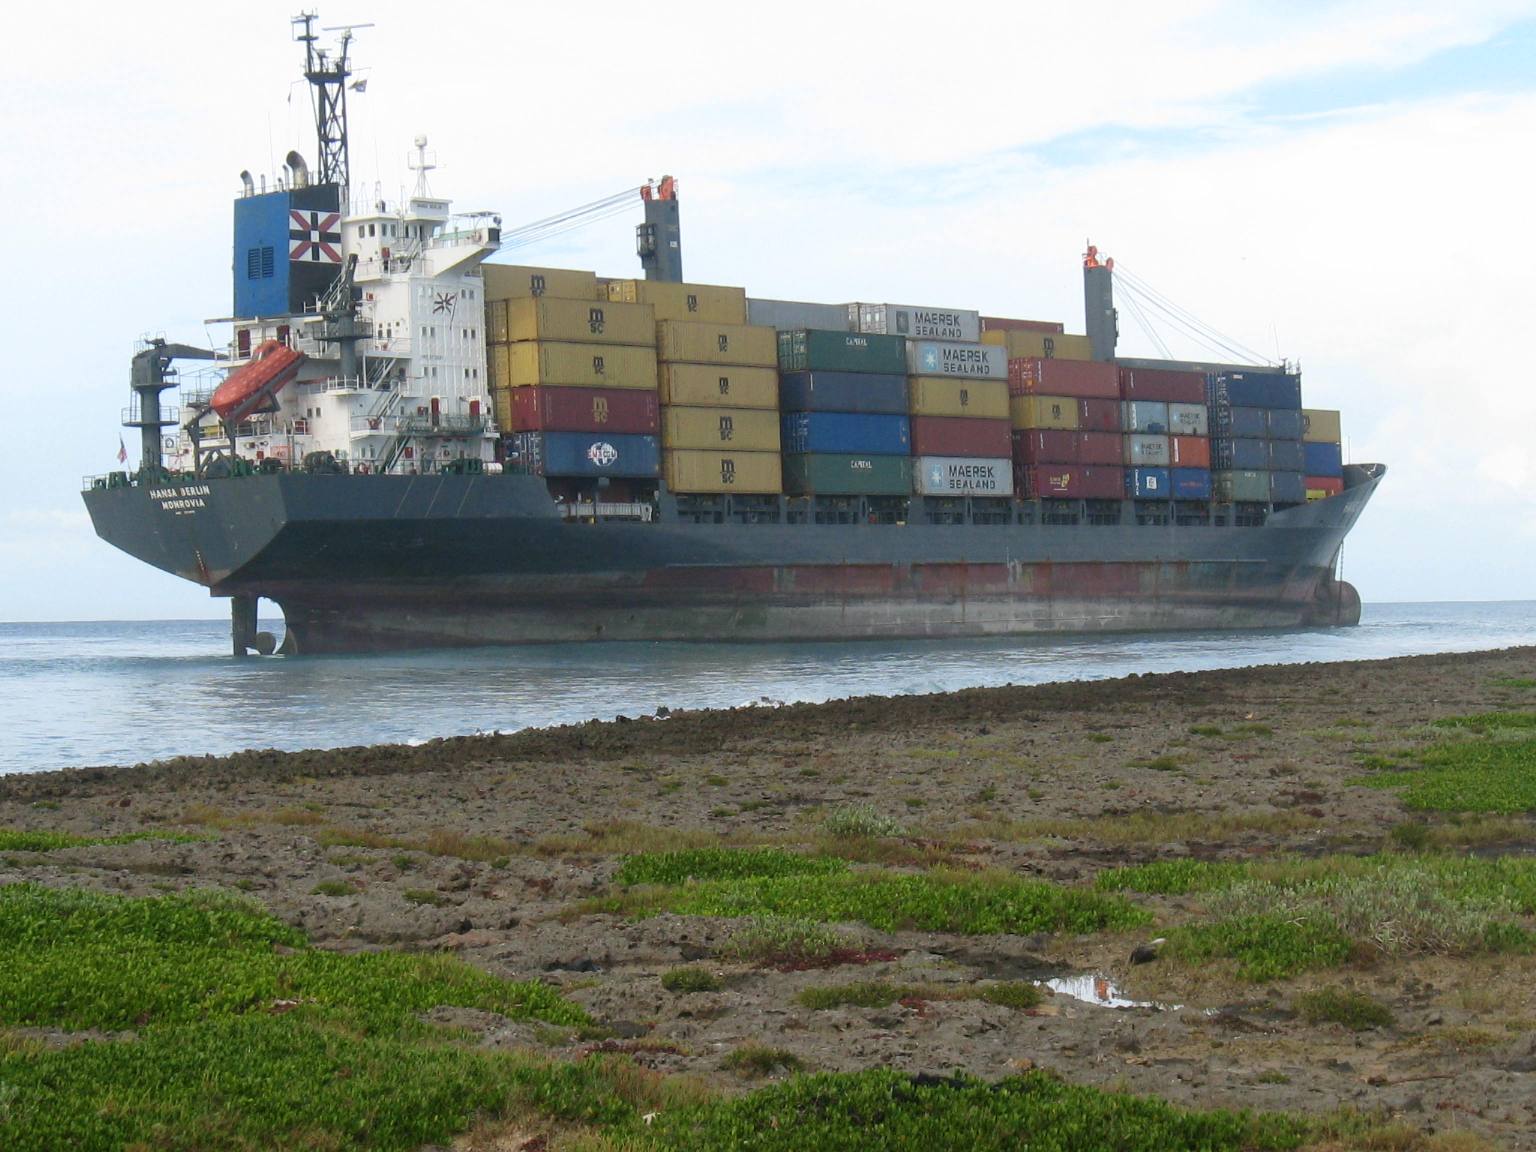 Following a lost of power during tropical storm Isaac off Cuba on 26 August, the Liberian-flagged container ship Hansa Berlin found herself bricked up off the northern coast of Cuba.